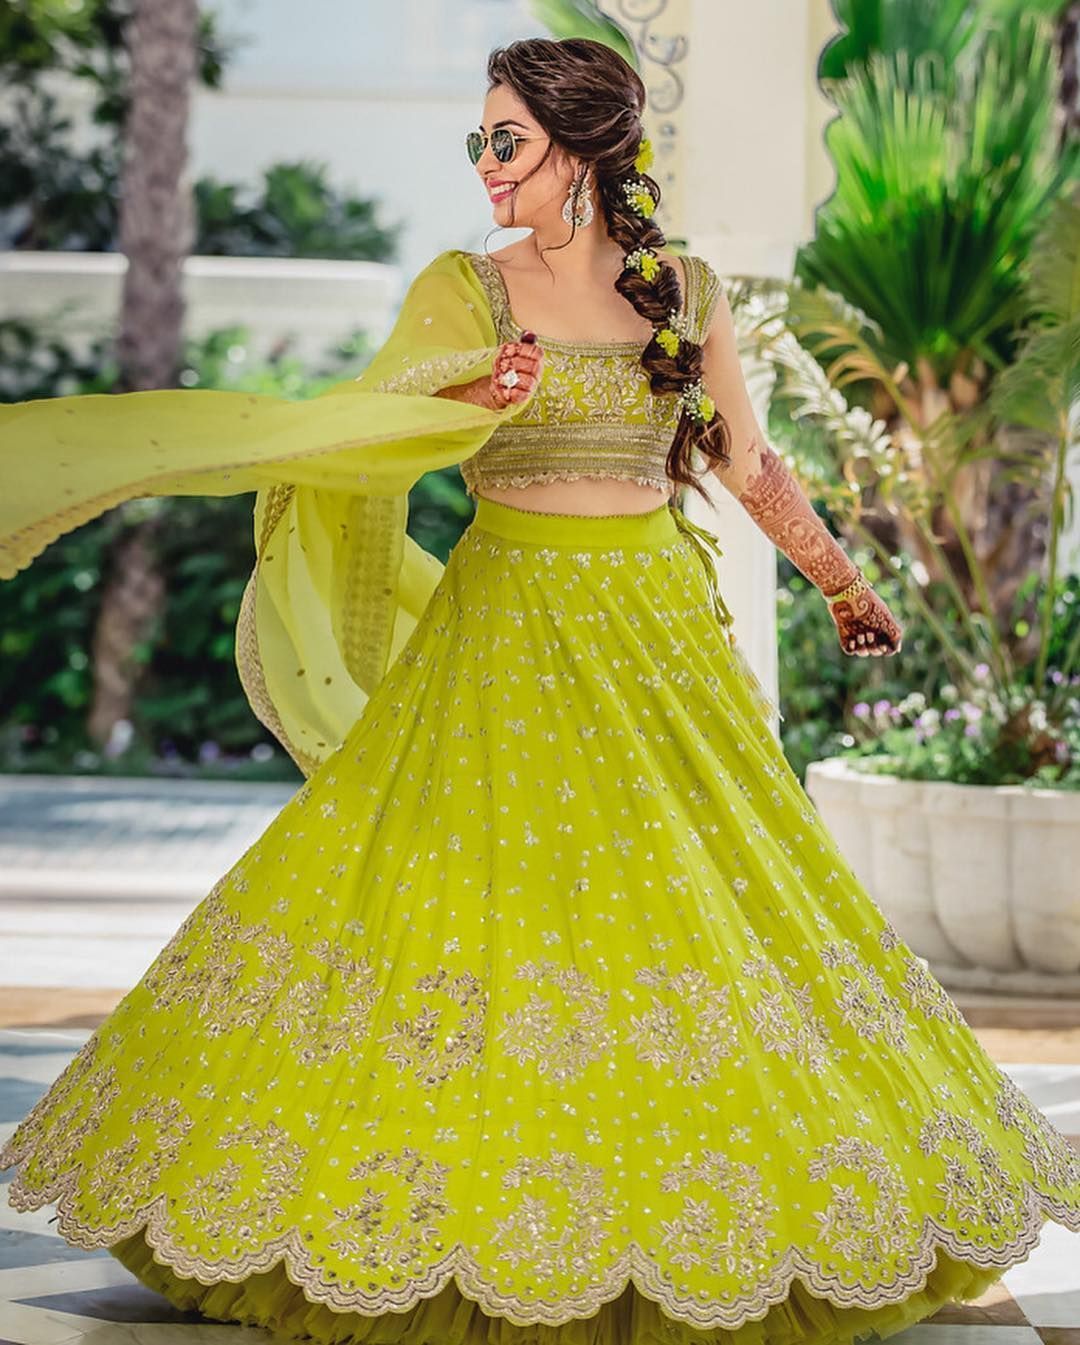 12 Mehndi Dresses and outfits For Bride Trending this Wedding Season